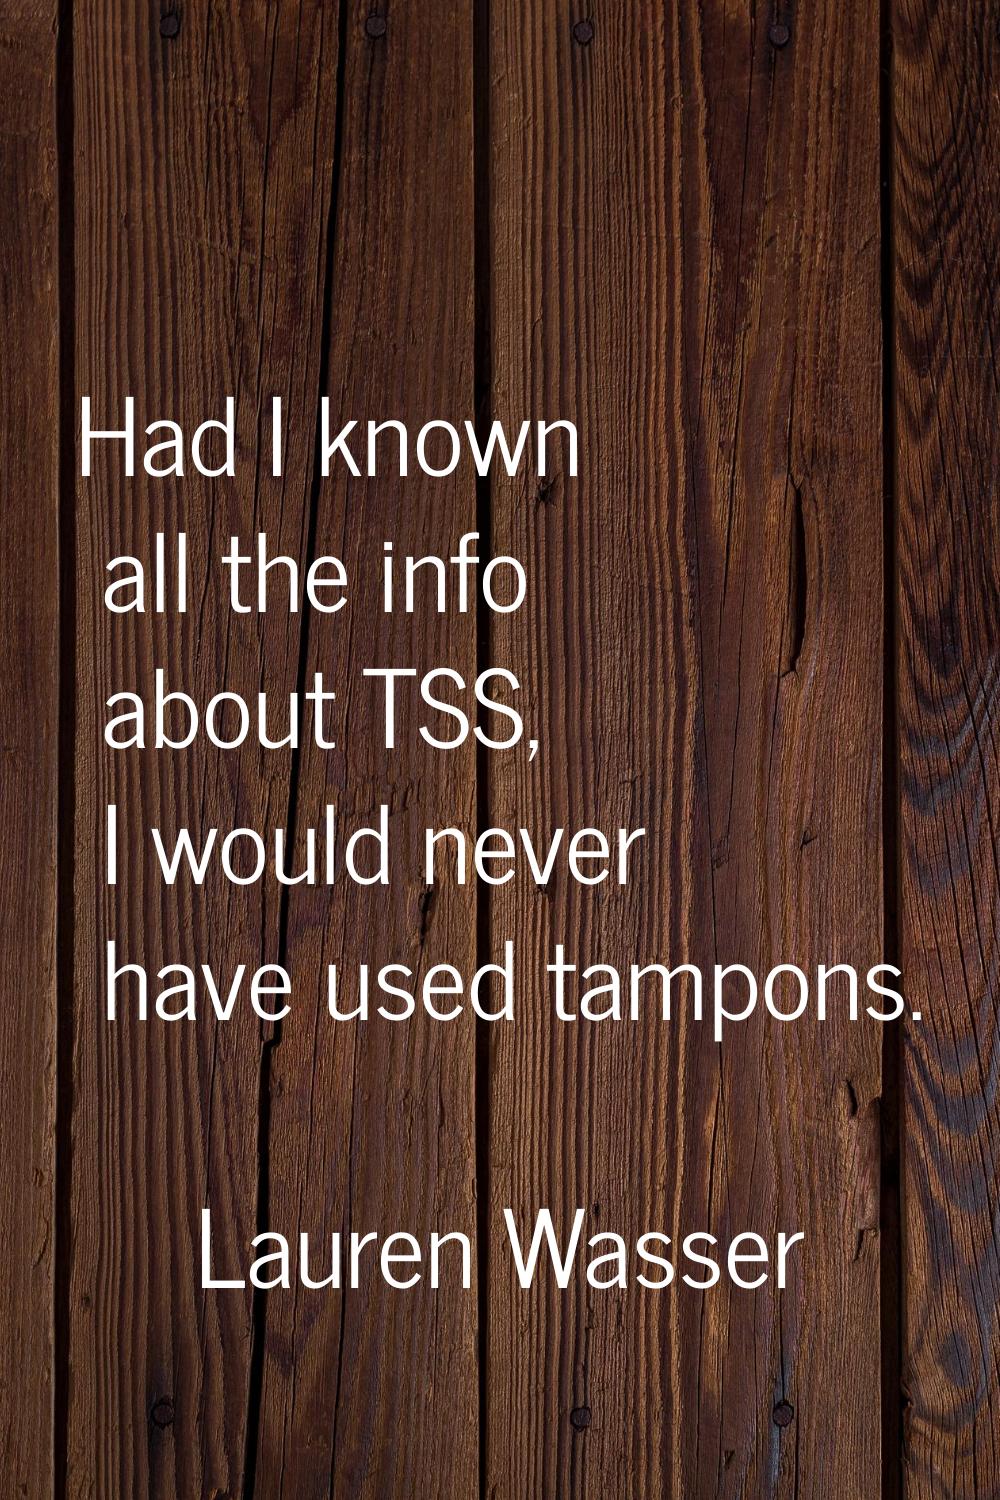 Had I known all the info about TSS, I would never have used tampons.